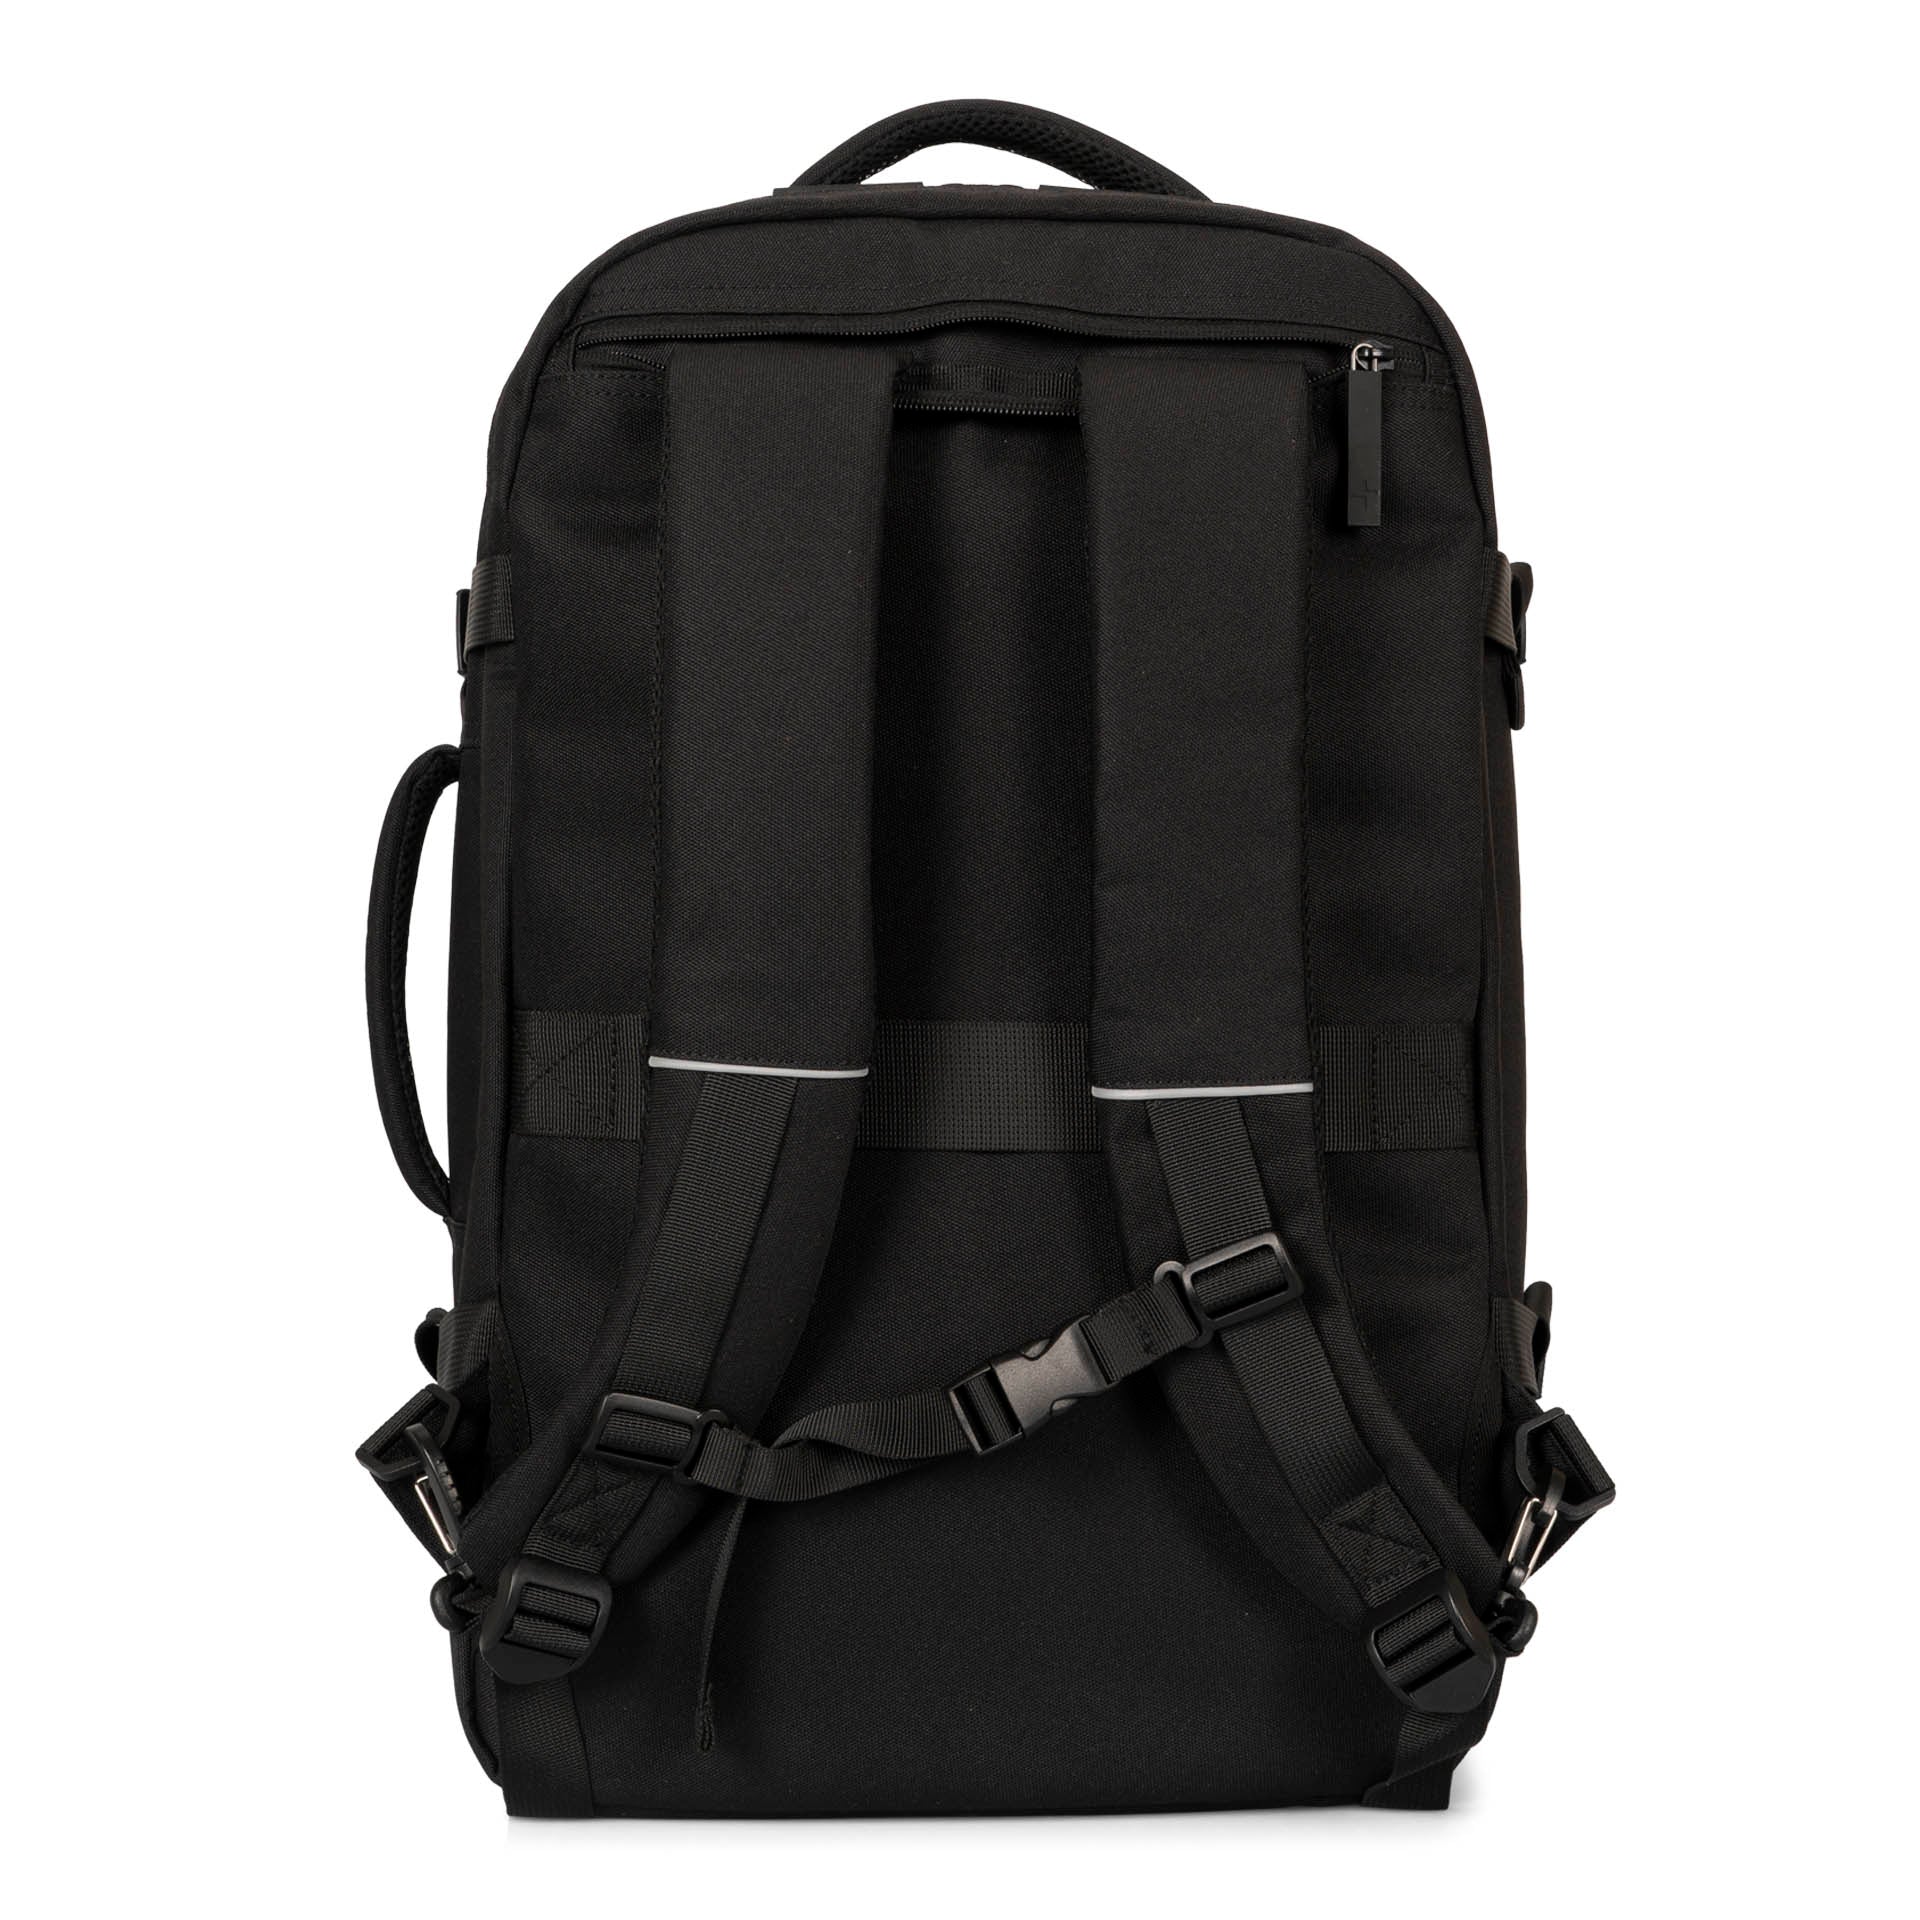 Tracker The 5 Continents Backpack – Bentley